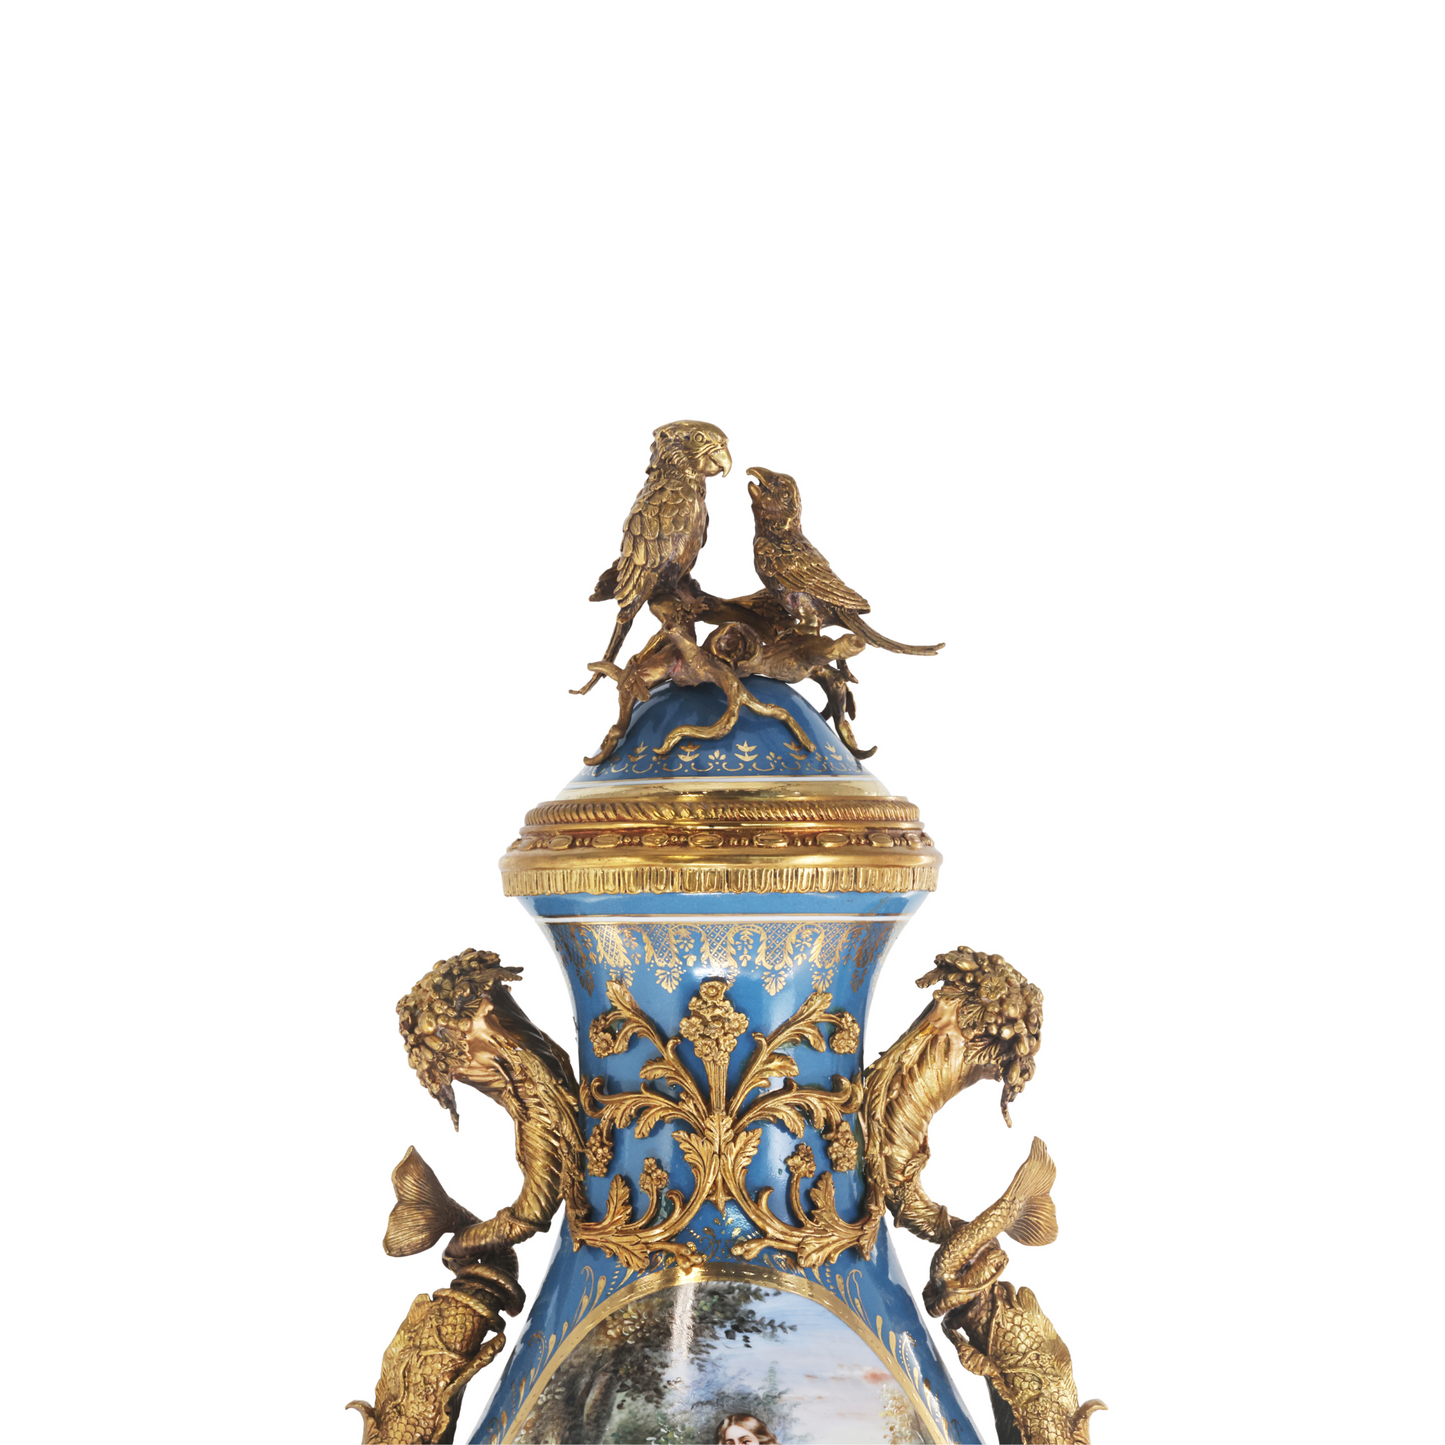 Hand-painted Teal Urn with Rococo Motifs